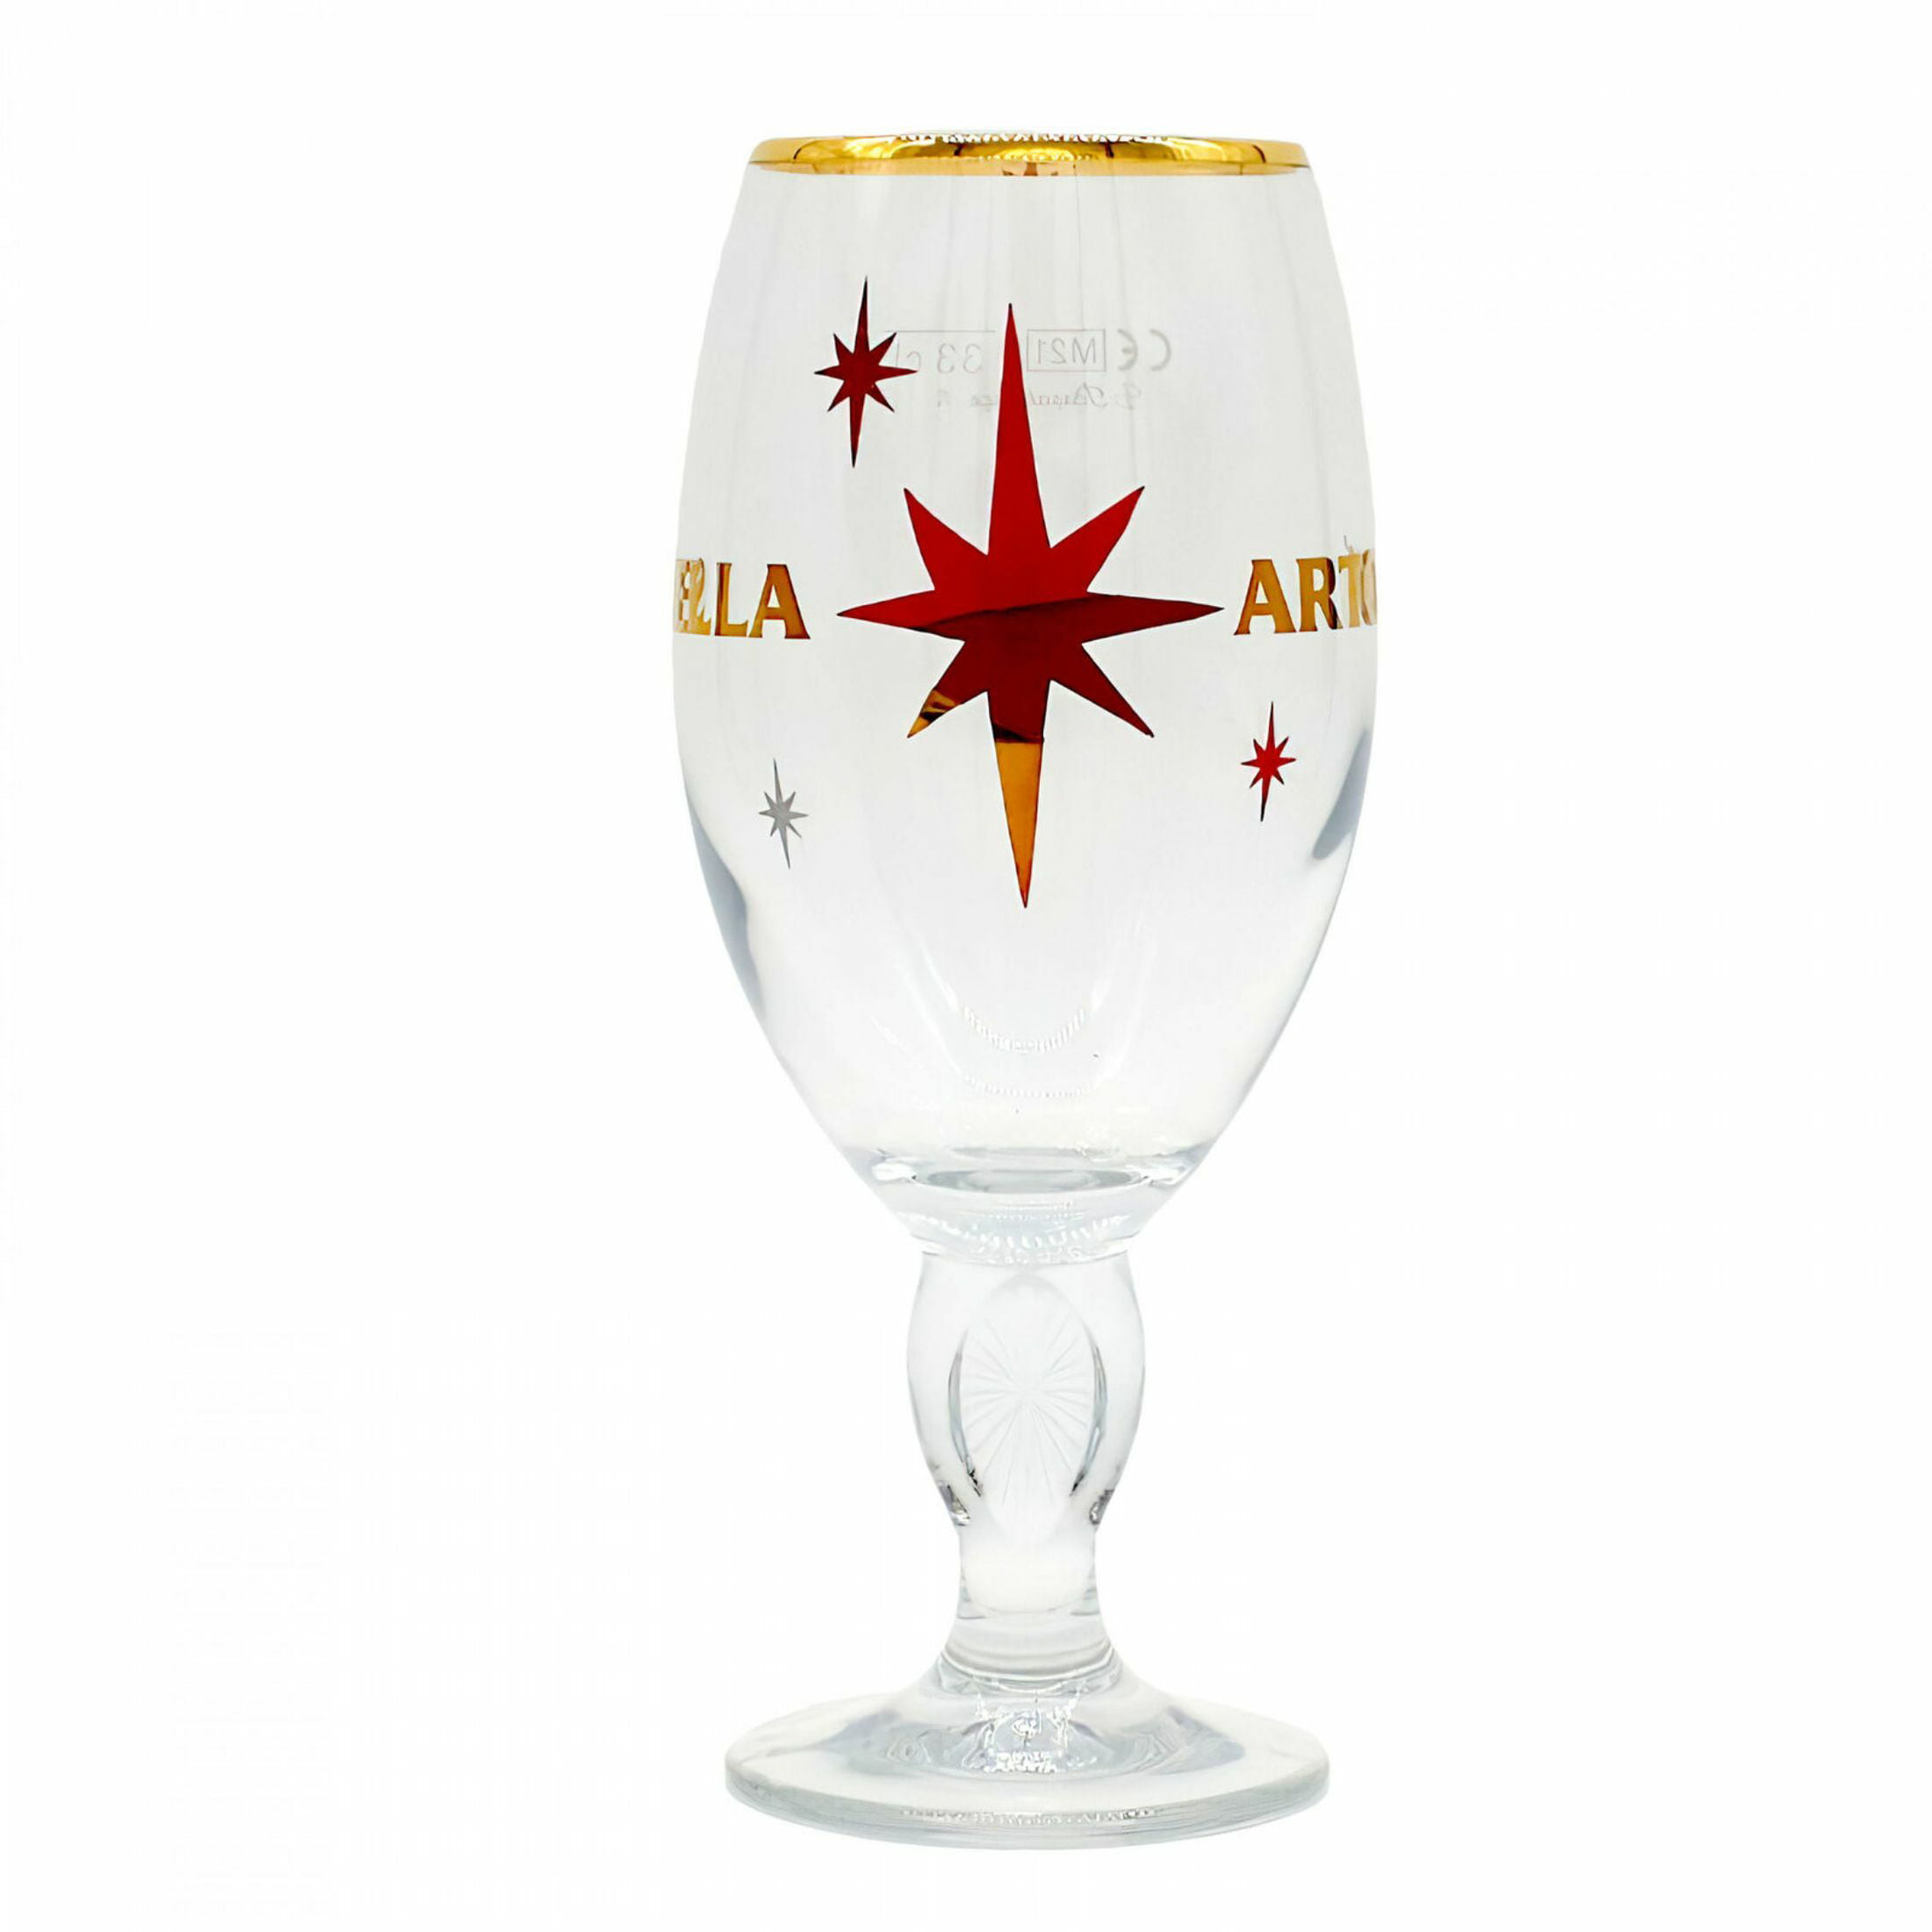 Stella Artois-Glassware 1 Pack in Gift Box - Water.Org Give Back Chalice  Clear - Walmart.com